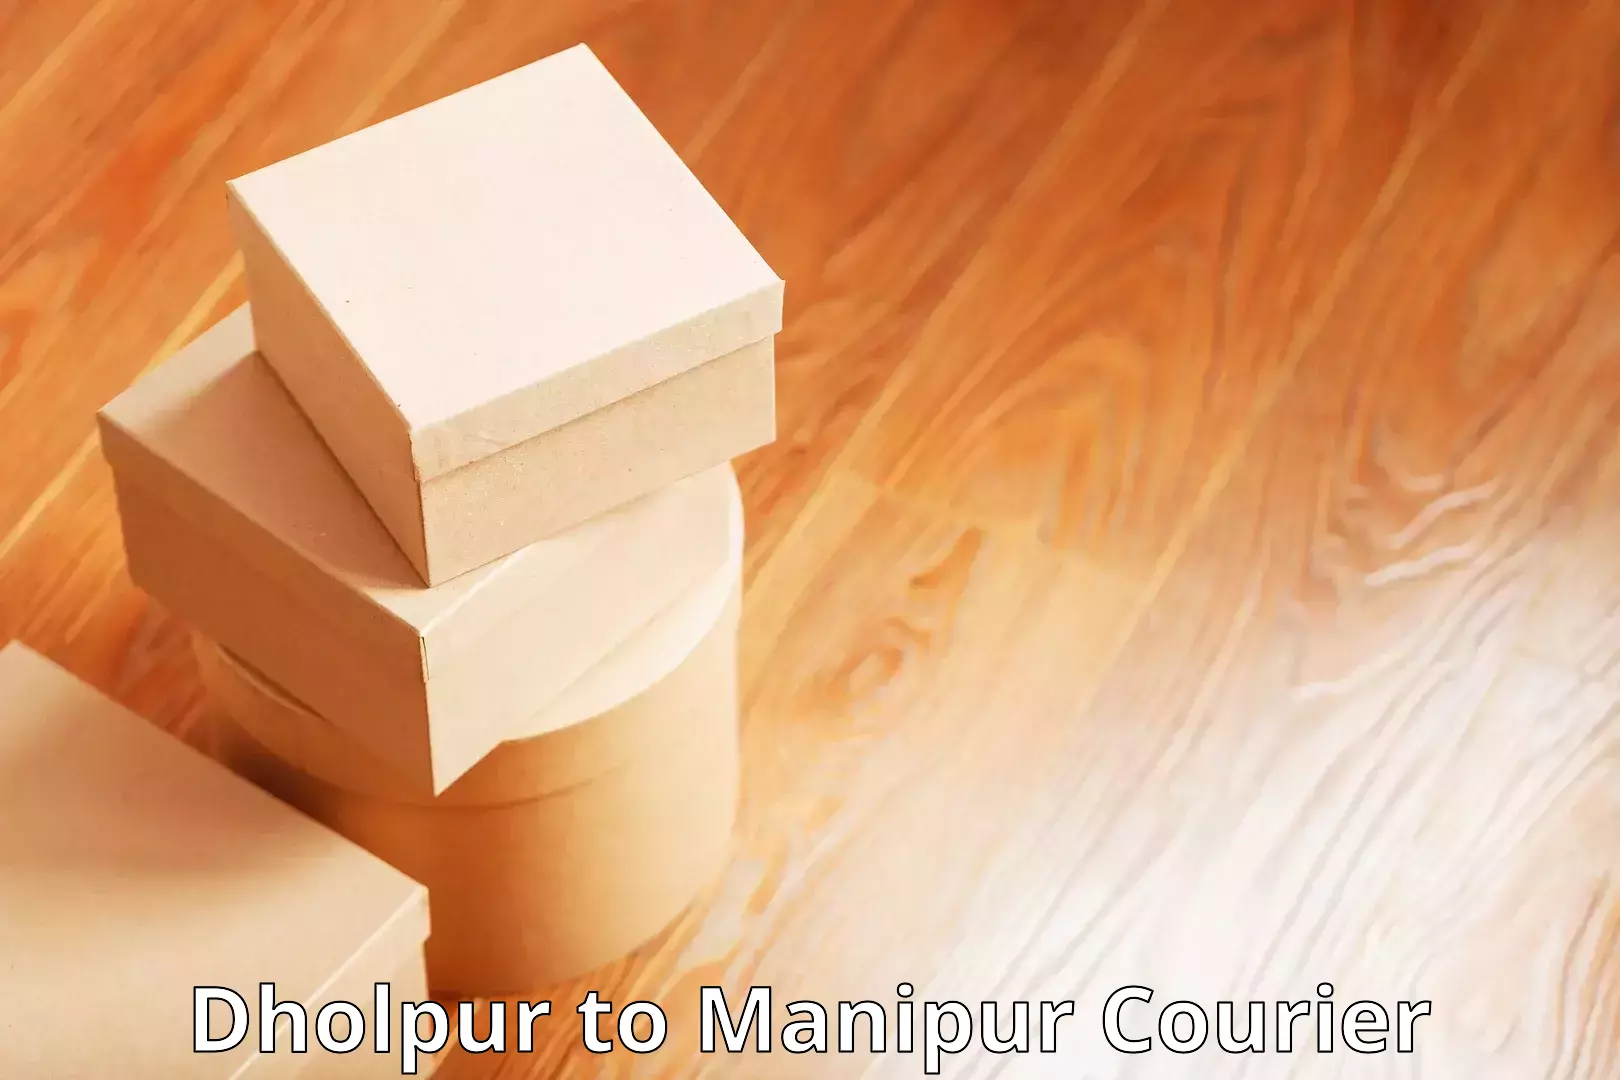 State-of-the-art courier technology Dholpur to Ukhrul